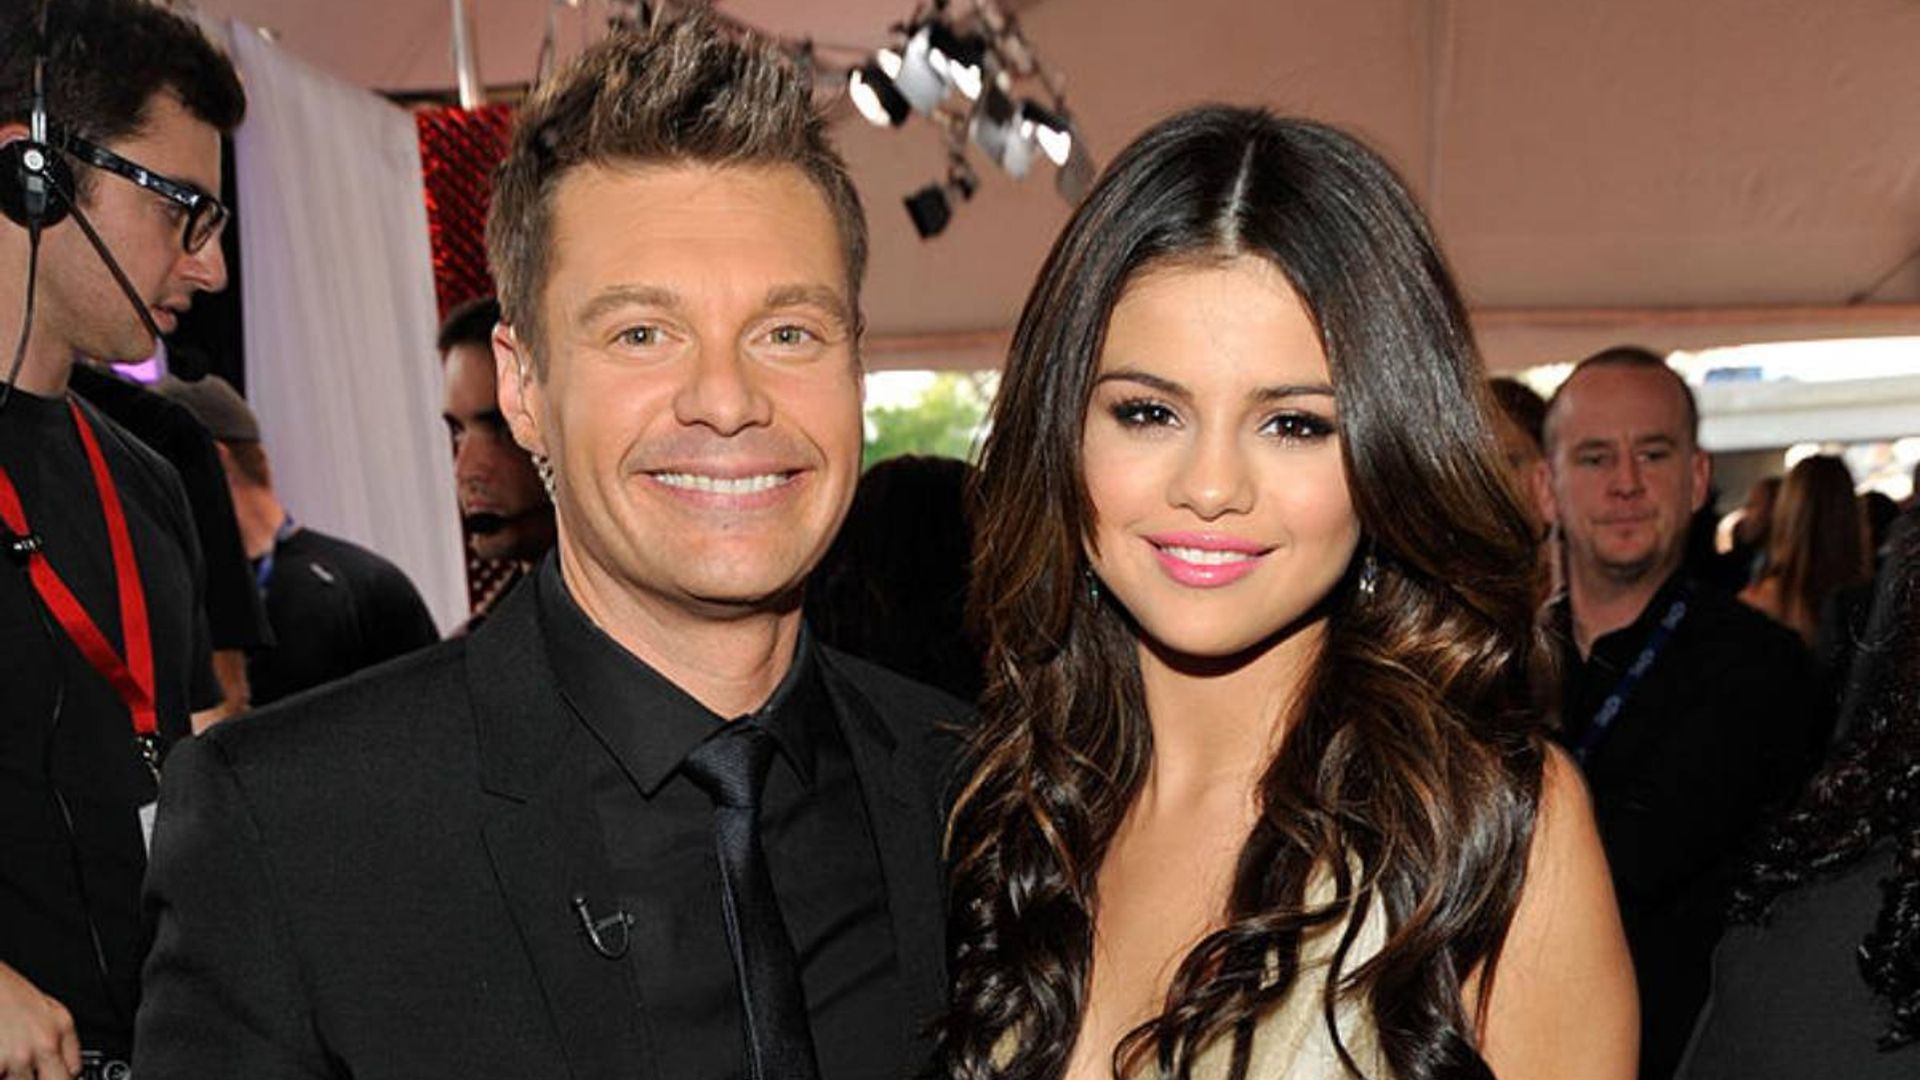 Selena Gomez and Ryan Seacrest cause a stir with fans convinced they're dating